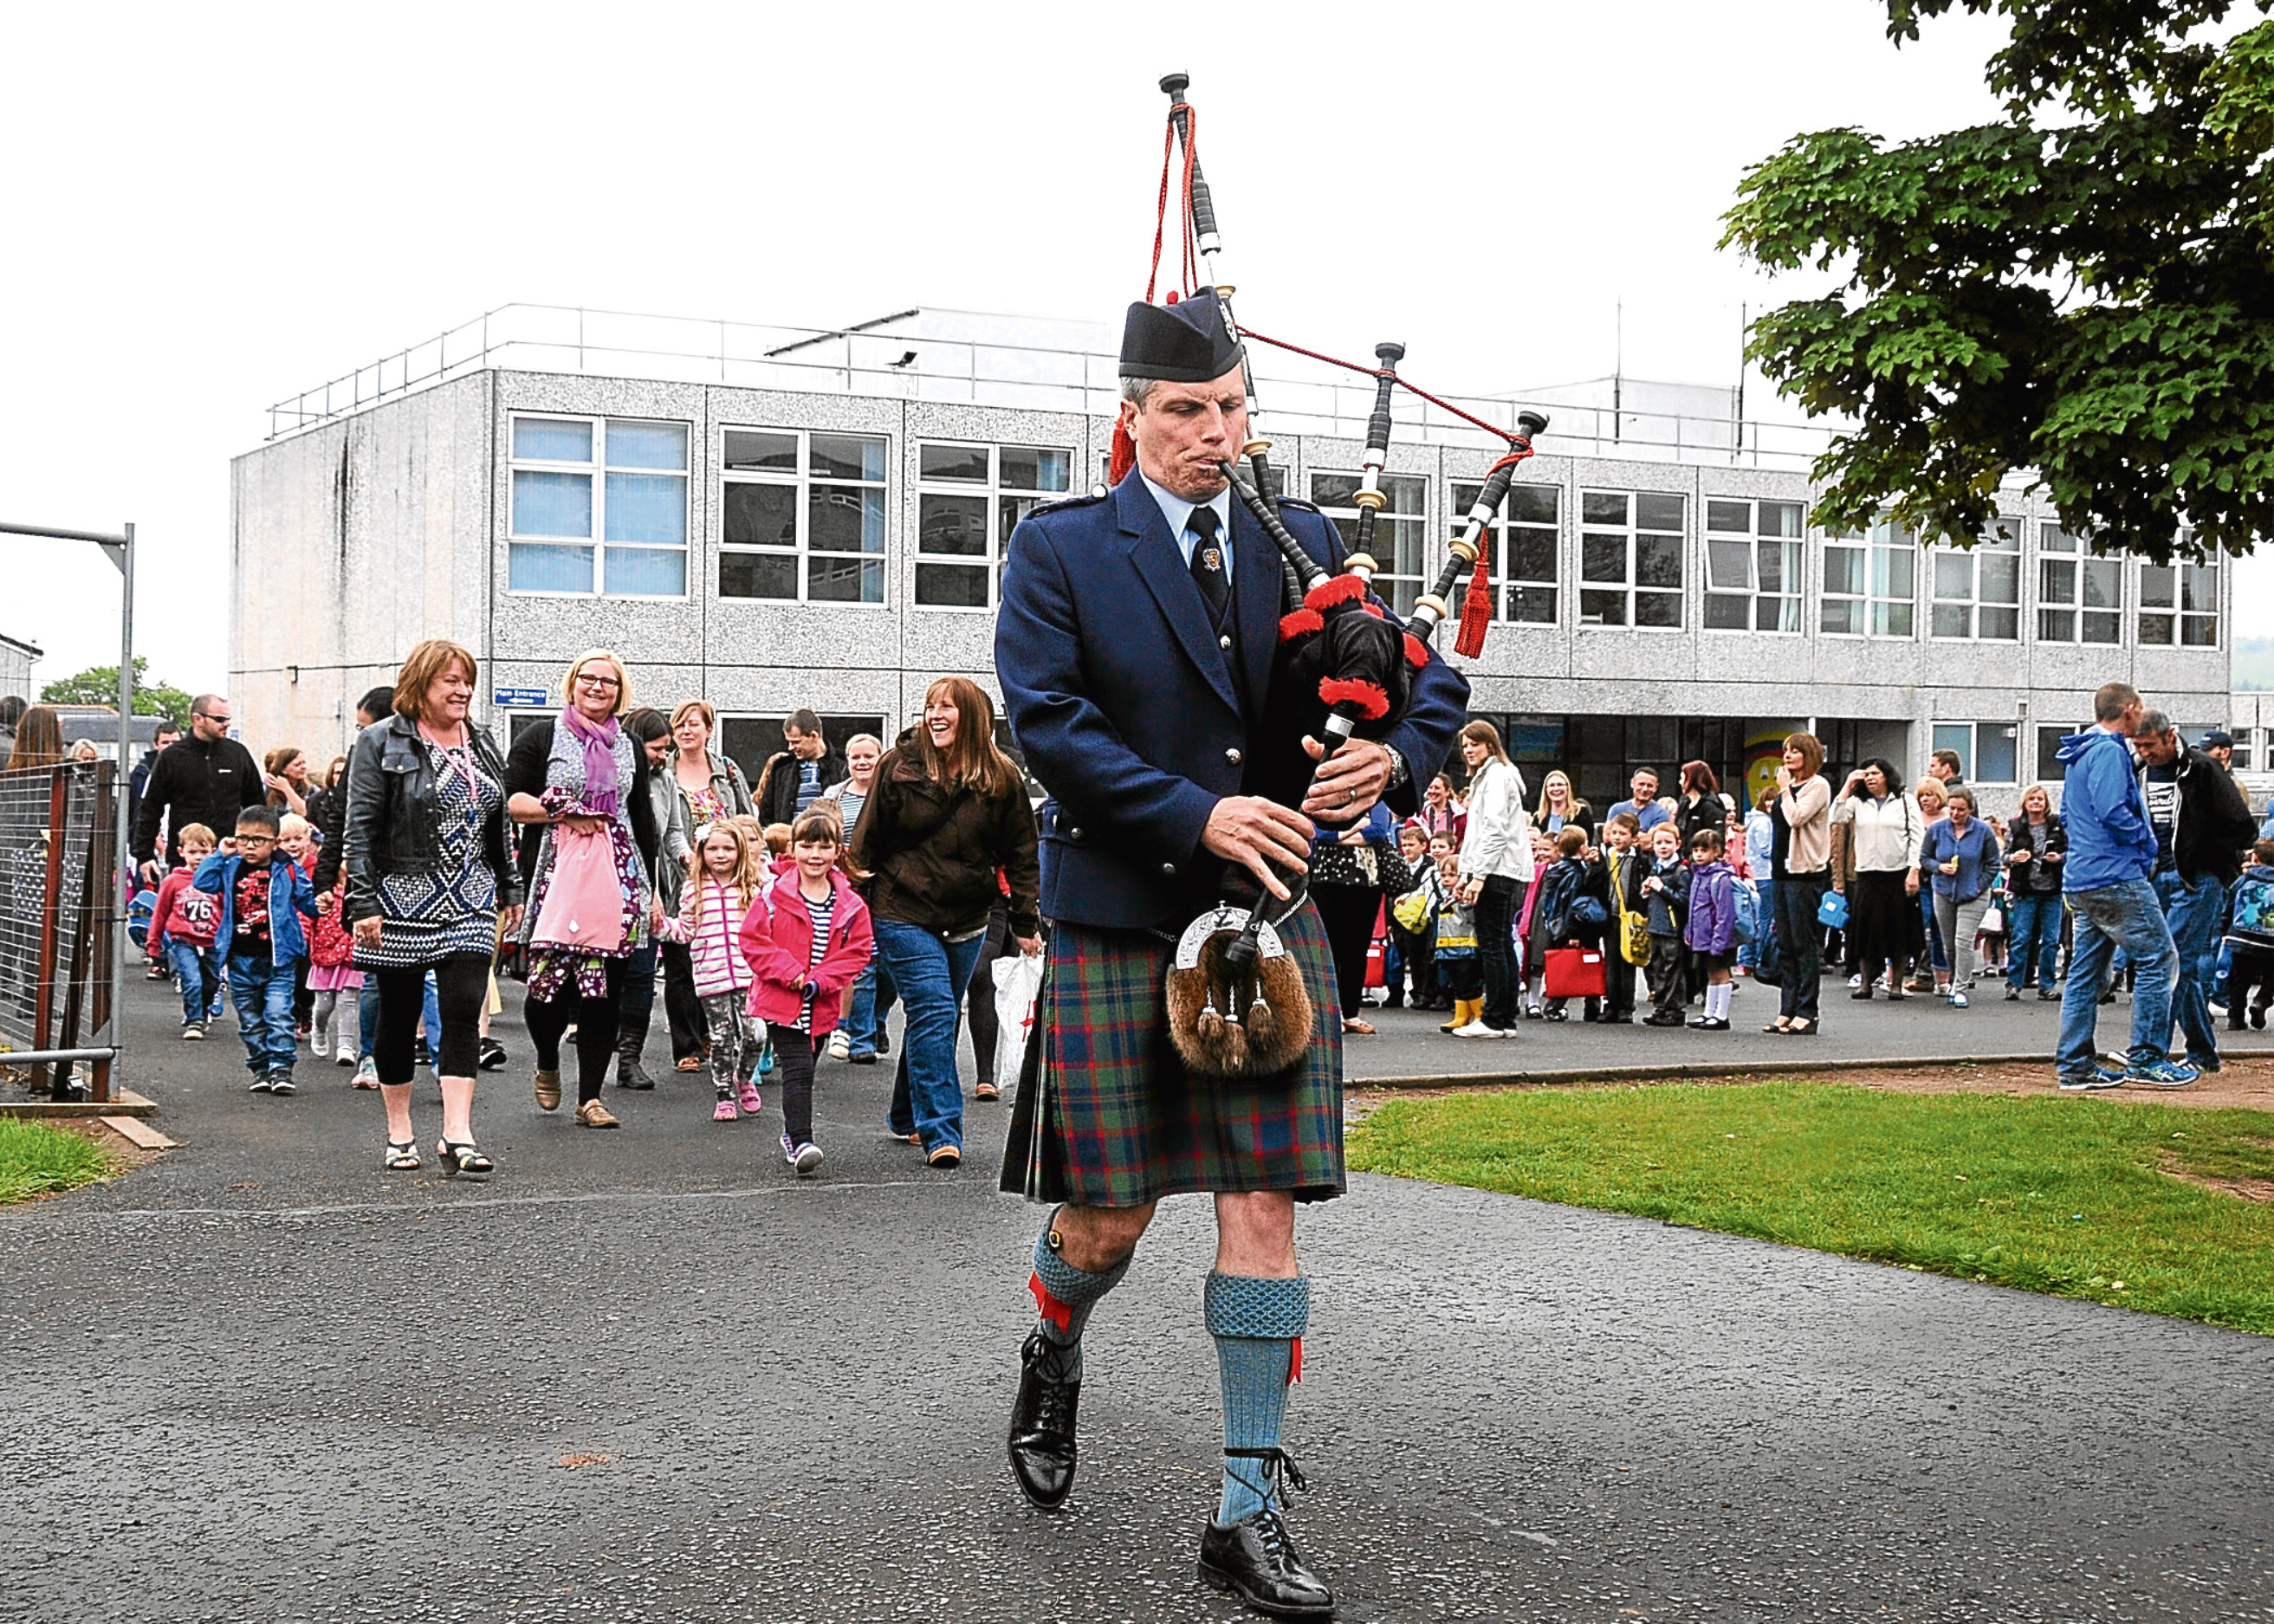 Pupils from Perth’s Oakbank Primary School march into their new school building in 2015, led by piper Adam Scrimgeour.